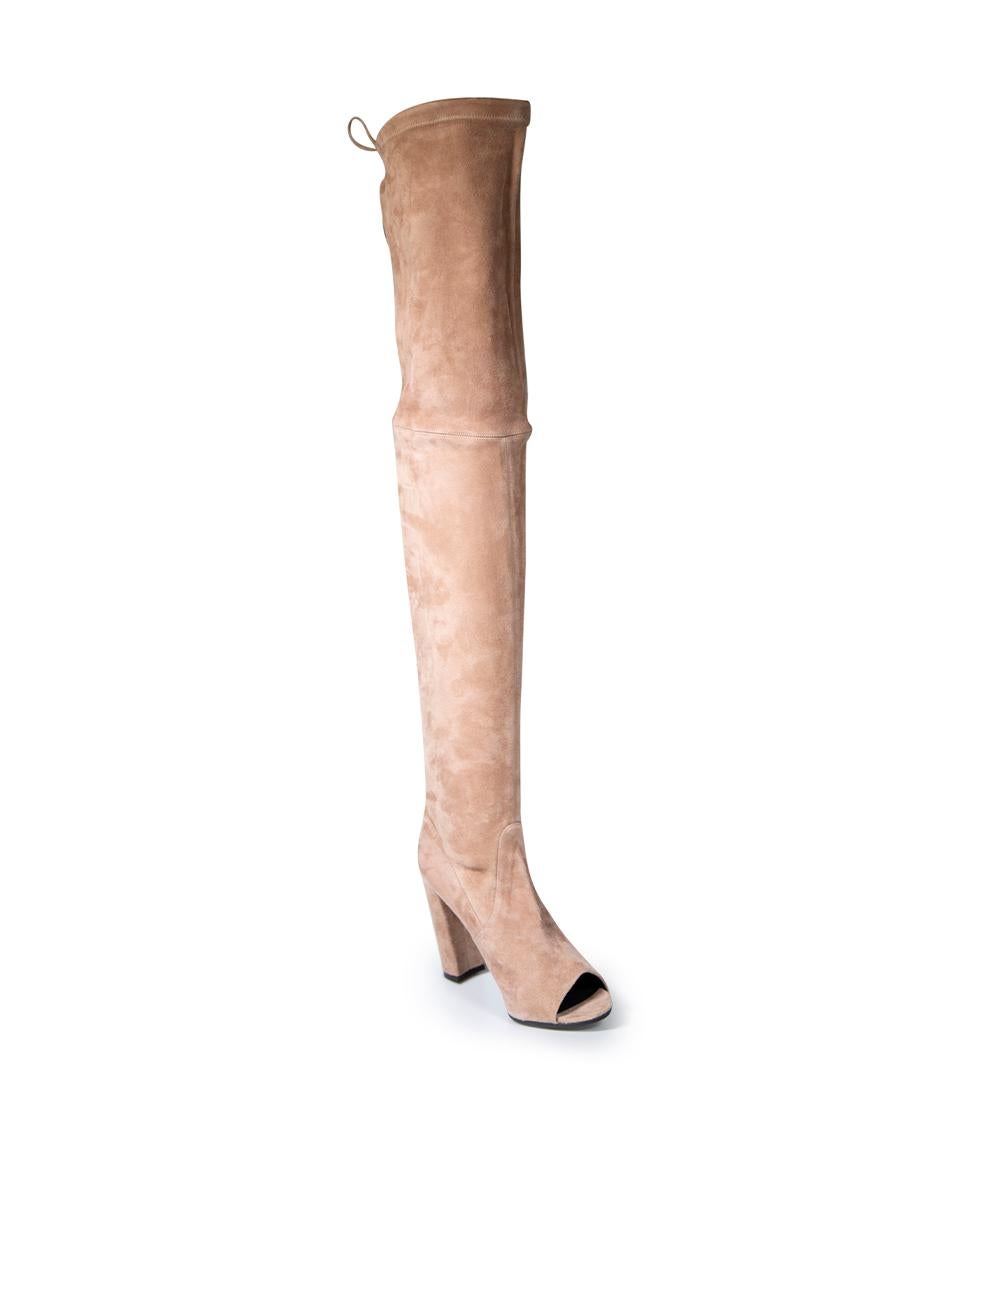 CONDITION is Very good. Minimal wear to boots is evident. Minimal wear to the uppers with some very light abrasion to the suede pile seen throughout on this used Stuart Weitzman resale item.
 
 
 
 Details
 
 
 Beige with pink undertone
 
 Suede
 
